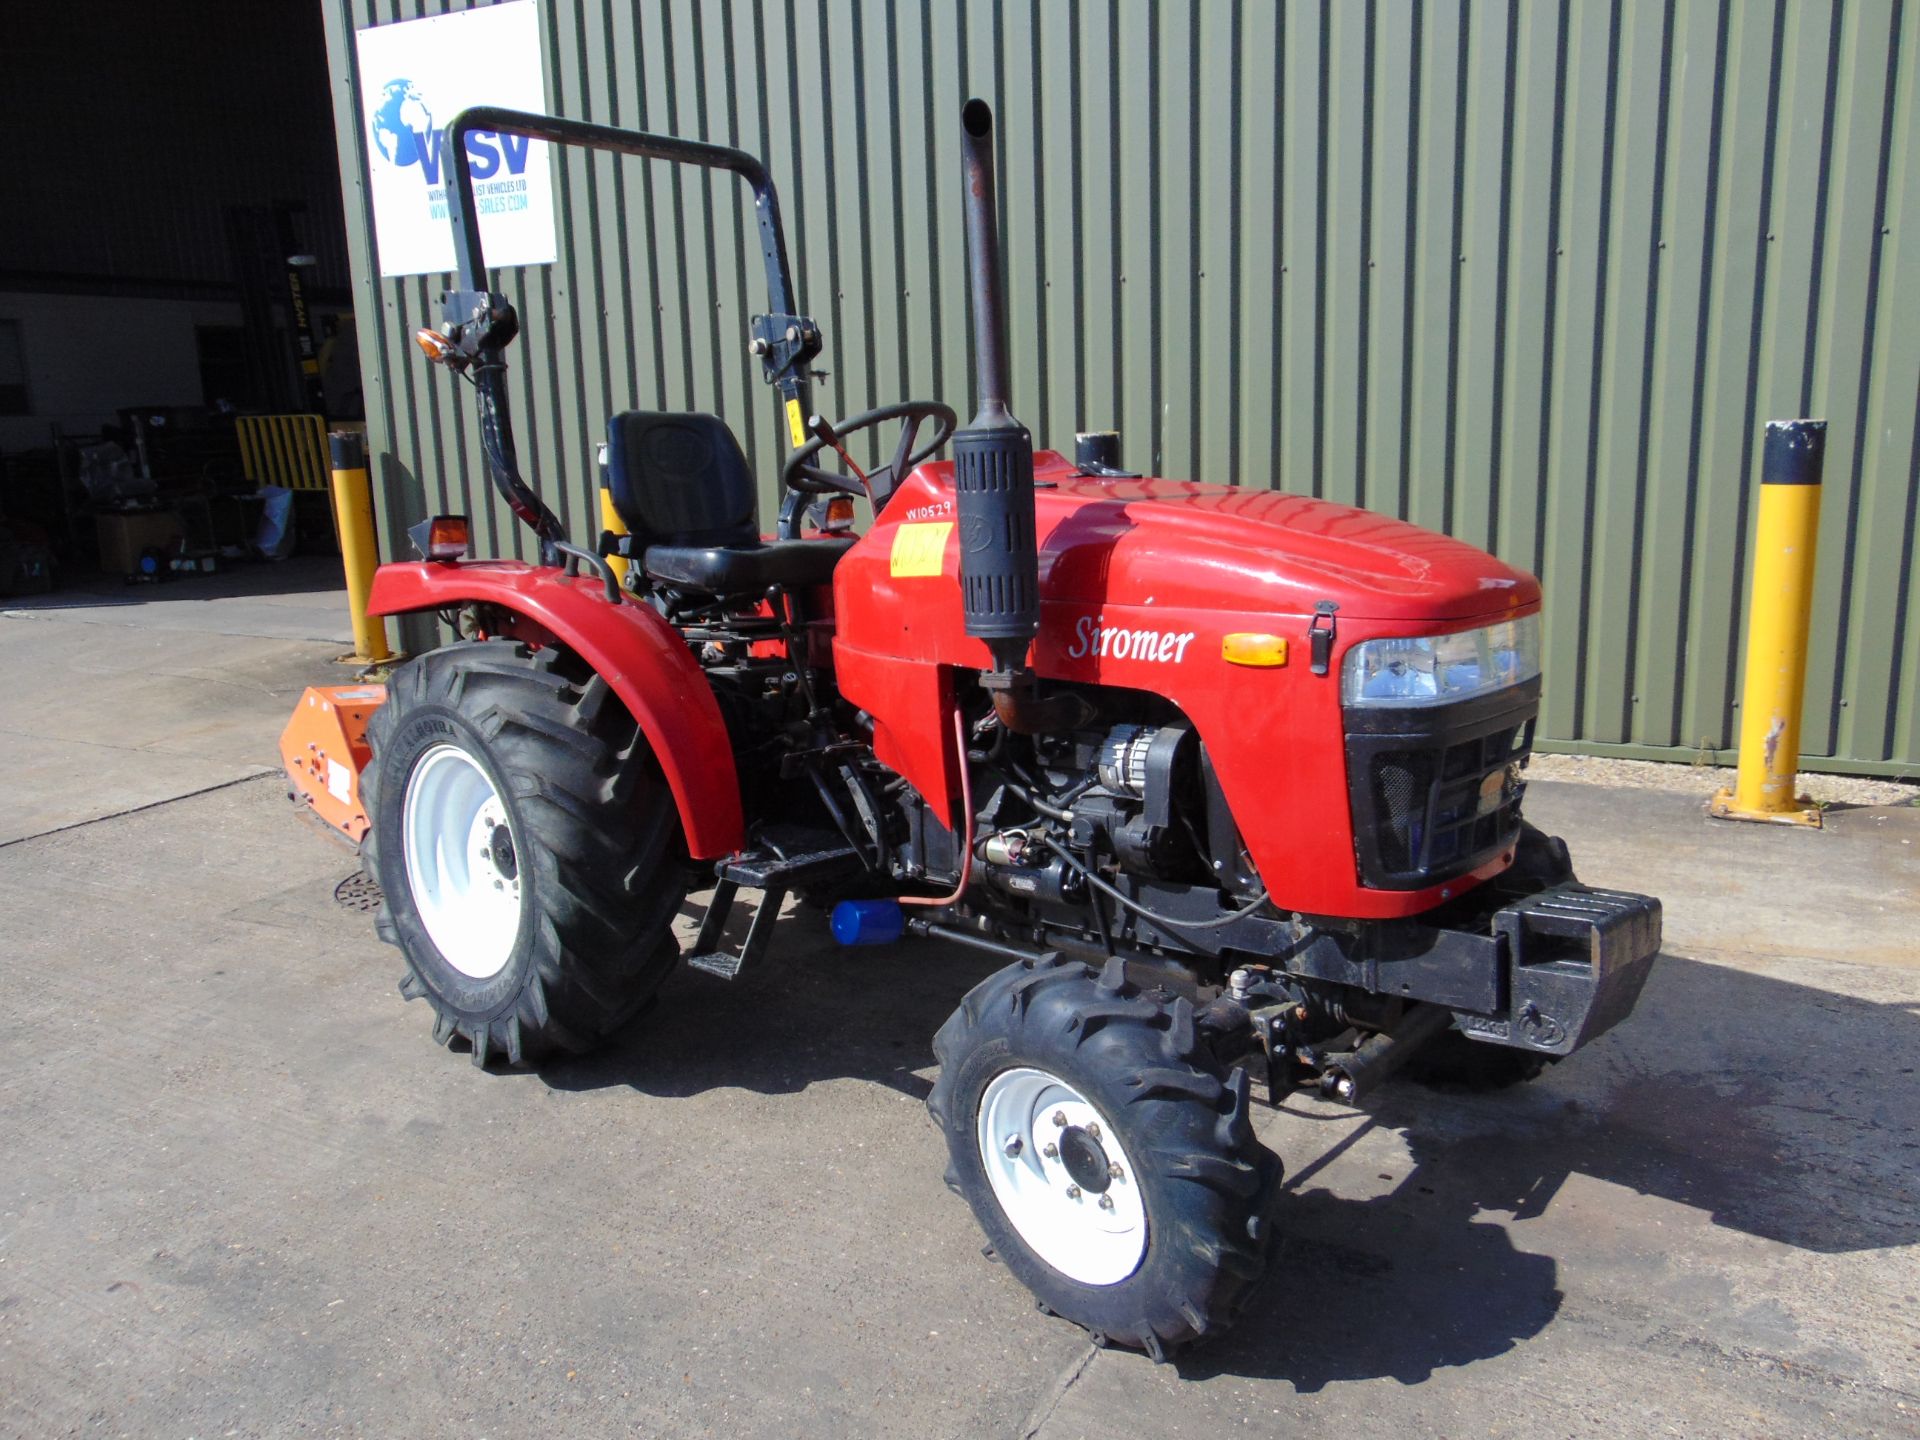 Siromer 204S 4WD Tractor c/w PTO driven Flail Mower ONLY 4 Hours! - Image 2 of 21